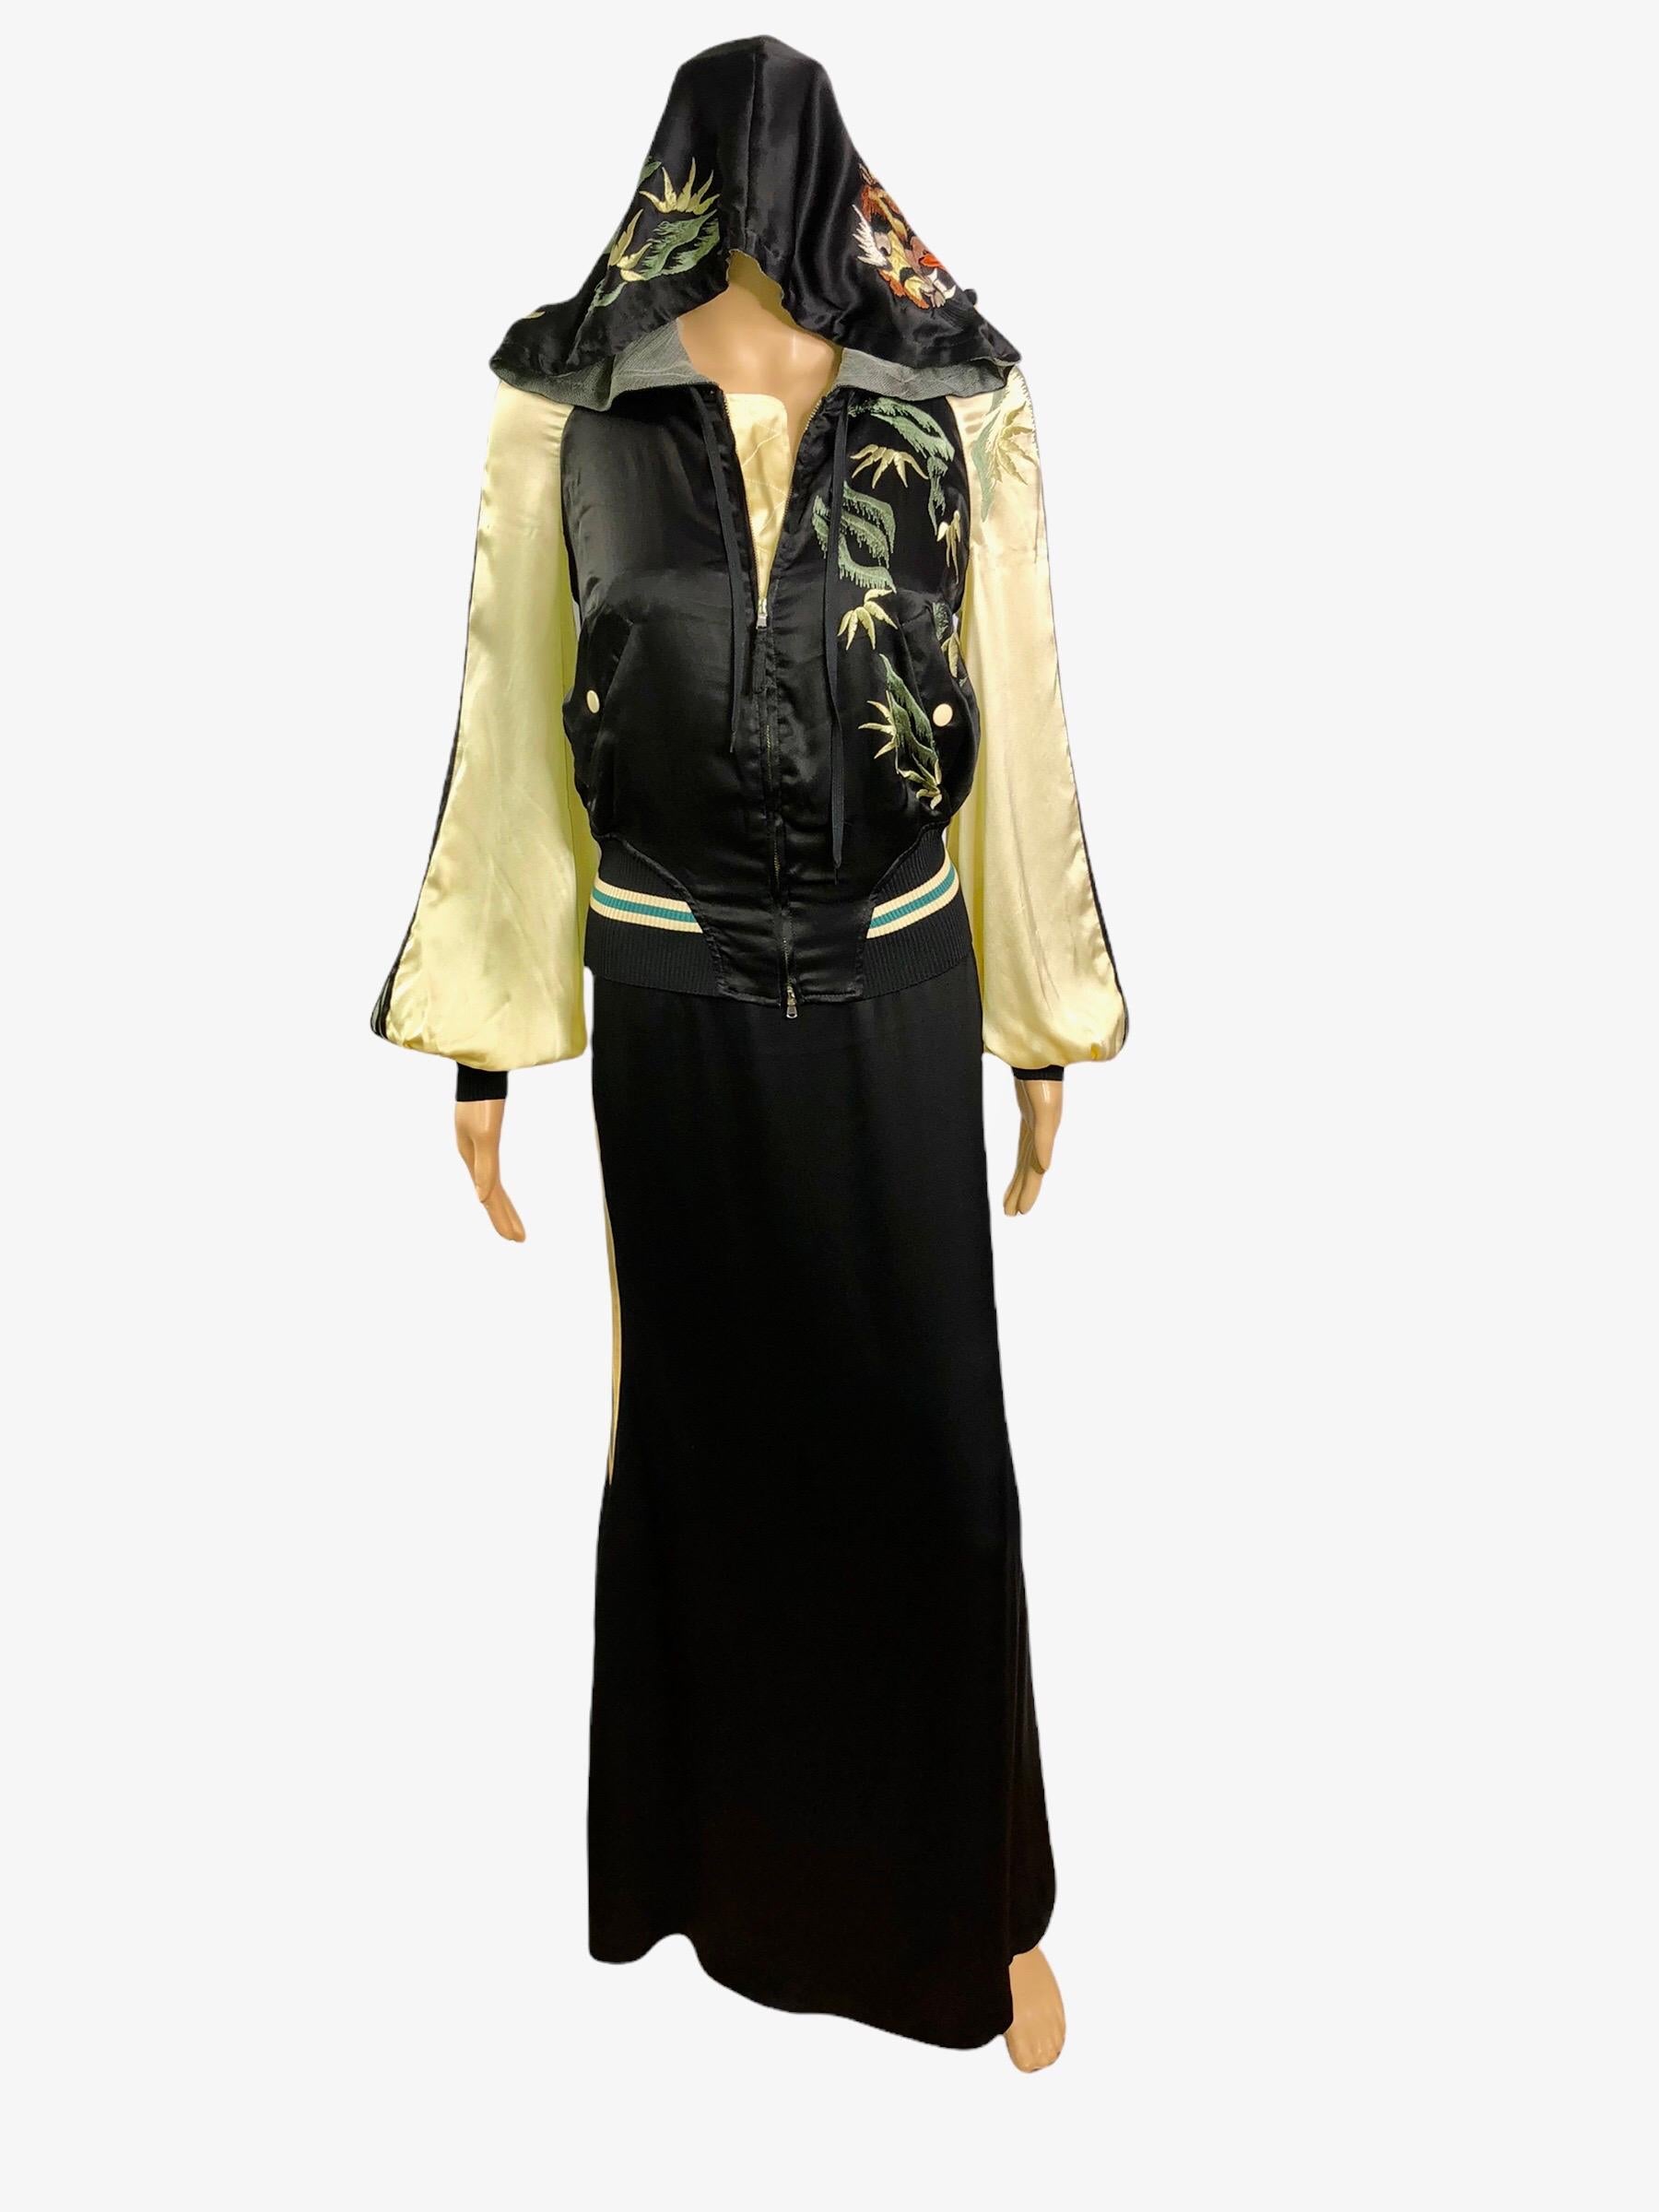 Jean Paul Gaultier S/S 2007 Runway Embroidered Backless Silk Maxi Dress and Jacket Ensemble 2 Piece Set 
Size IT 40/ IT 42

Look 66 from the Spring 2007 Collection.

Please note the dress is size IT 42. The jacket is IT 40.


